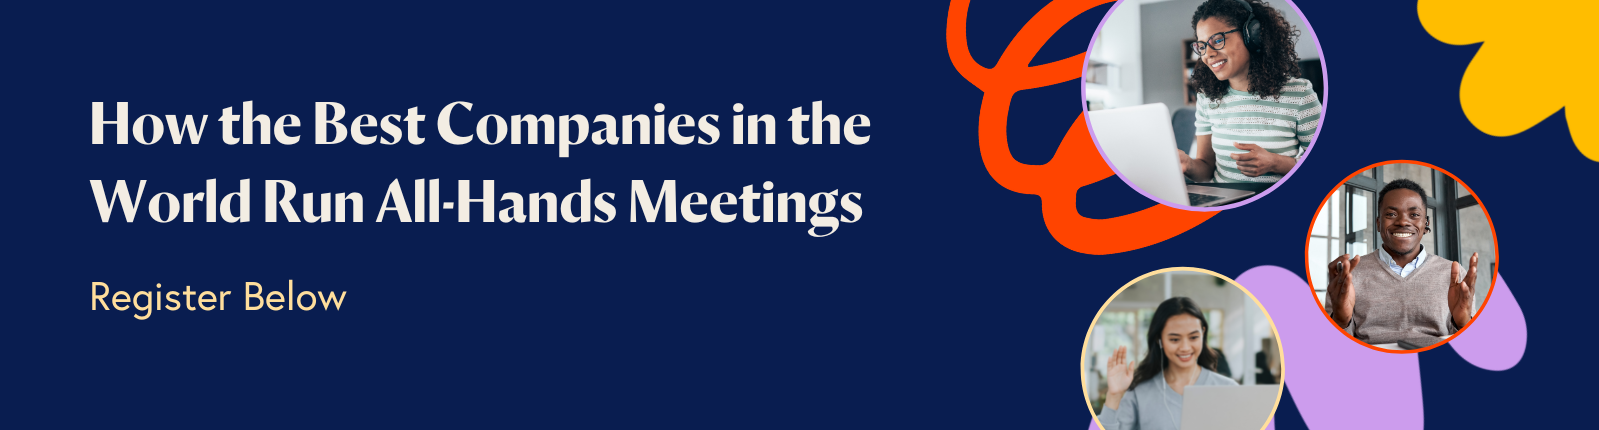 How the Best Companies in the World Run All-Hands Meetings (Webinar Invite)-10